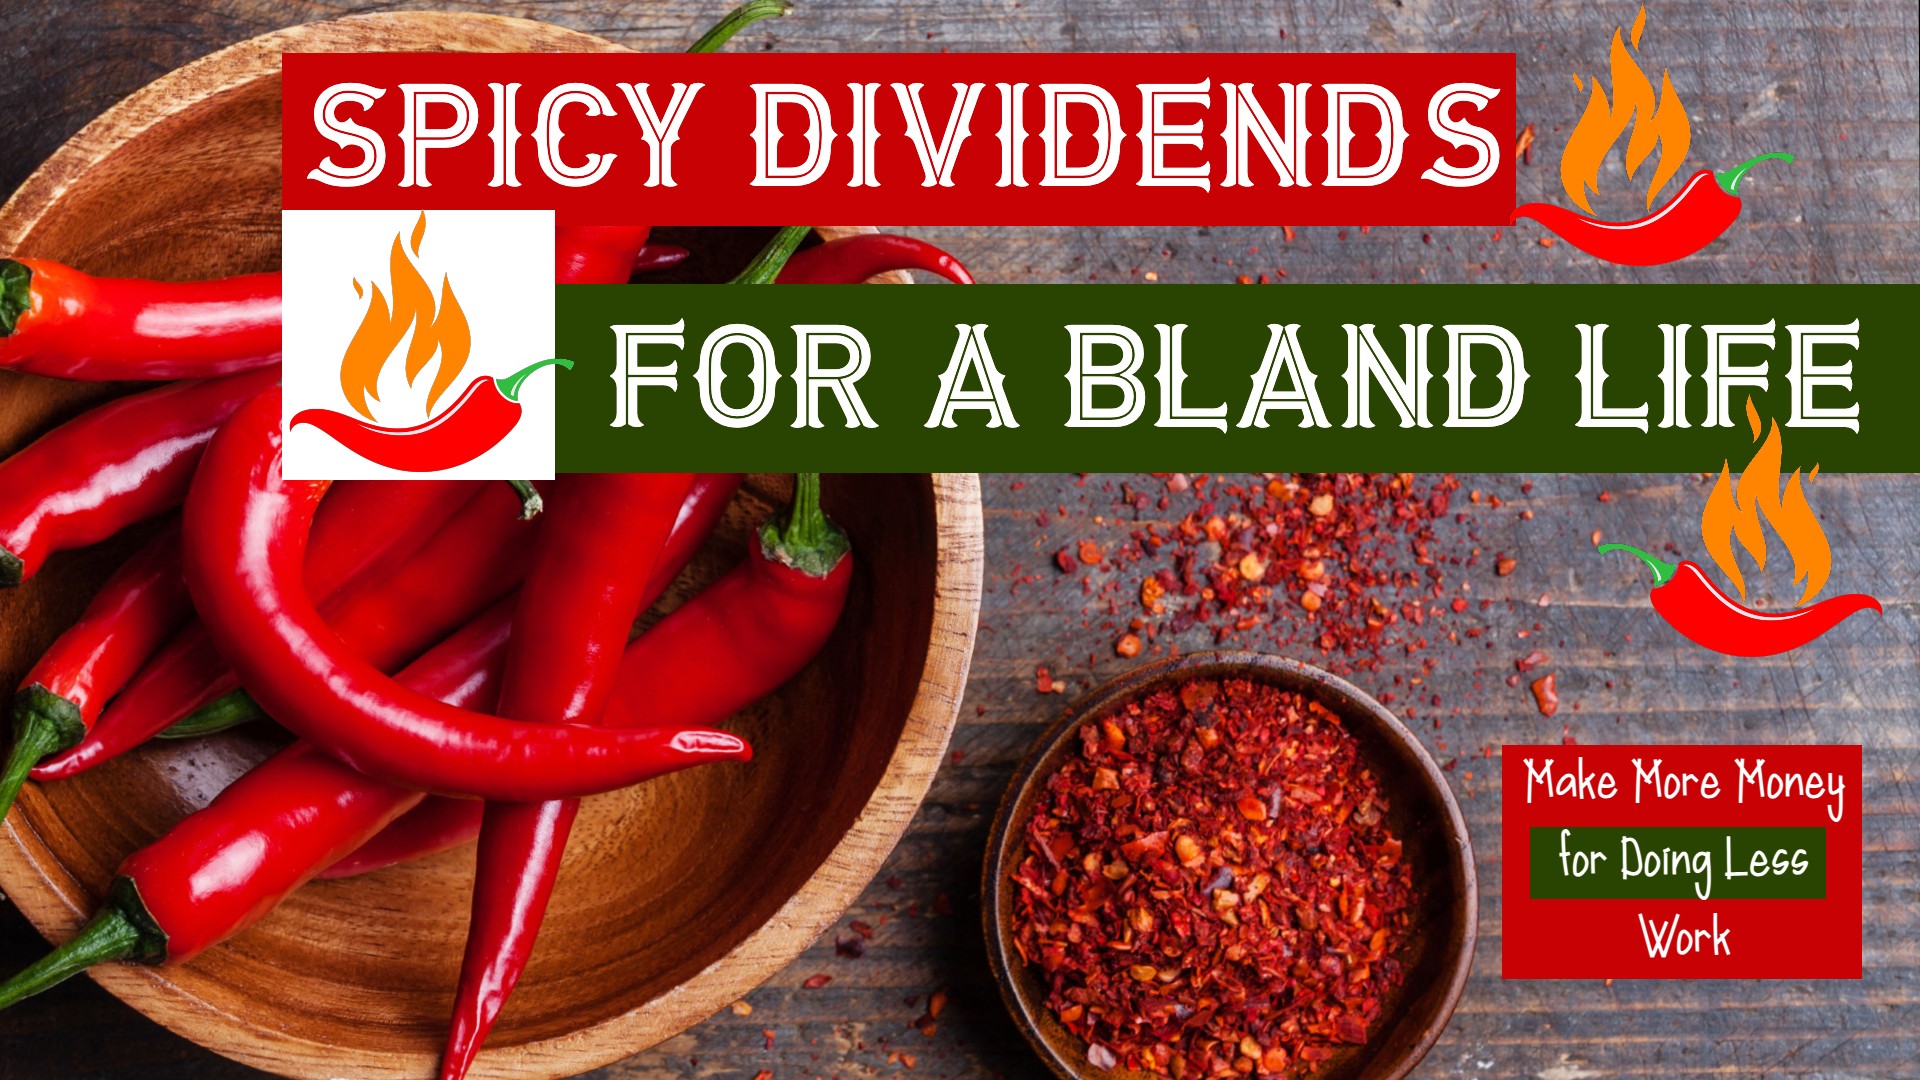 Spicy Dividends for a Bland Life: Make More Money for Doing Less Work